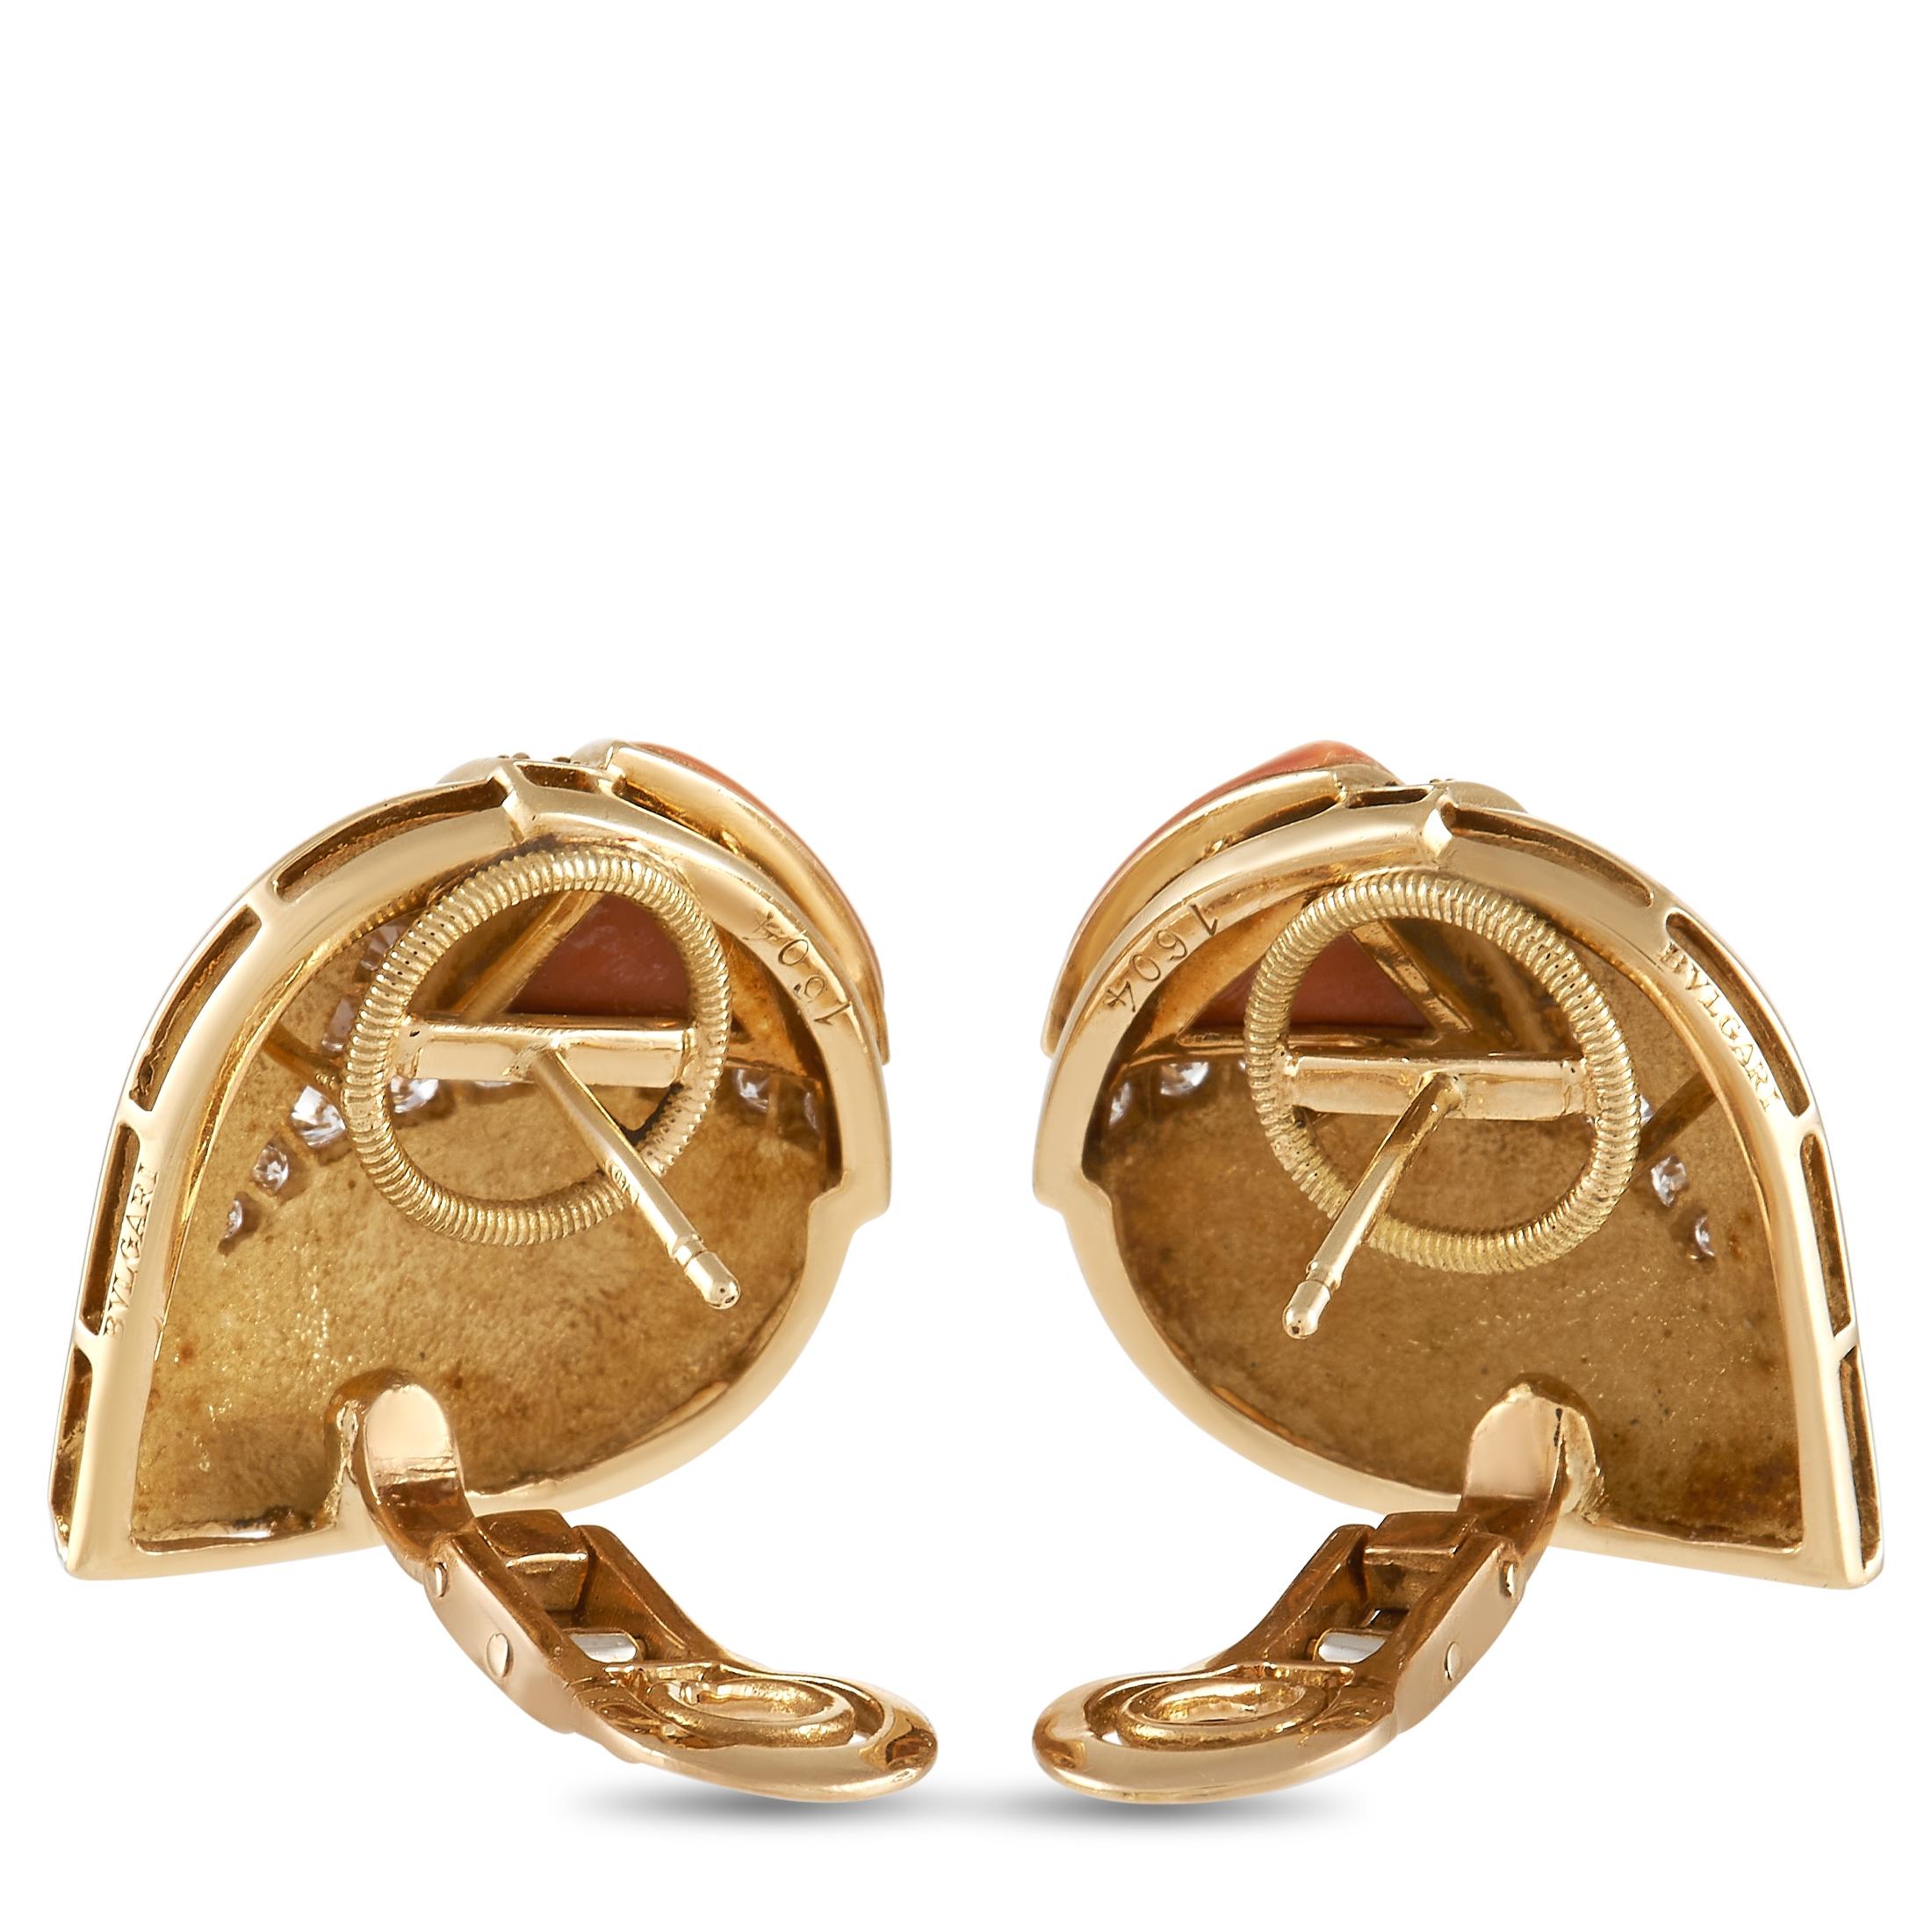 A stylish combination of luxury materials makes these Bvlgari earrings simply unforgettable. Each earring measures 1” round and juxtaposes opulent 18K Yellow Gold with inset Coral accents. Diamonds with a total weight of 1.30 carats add a touch of